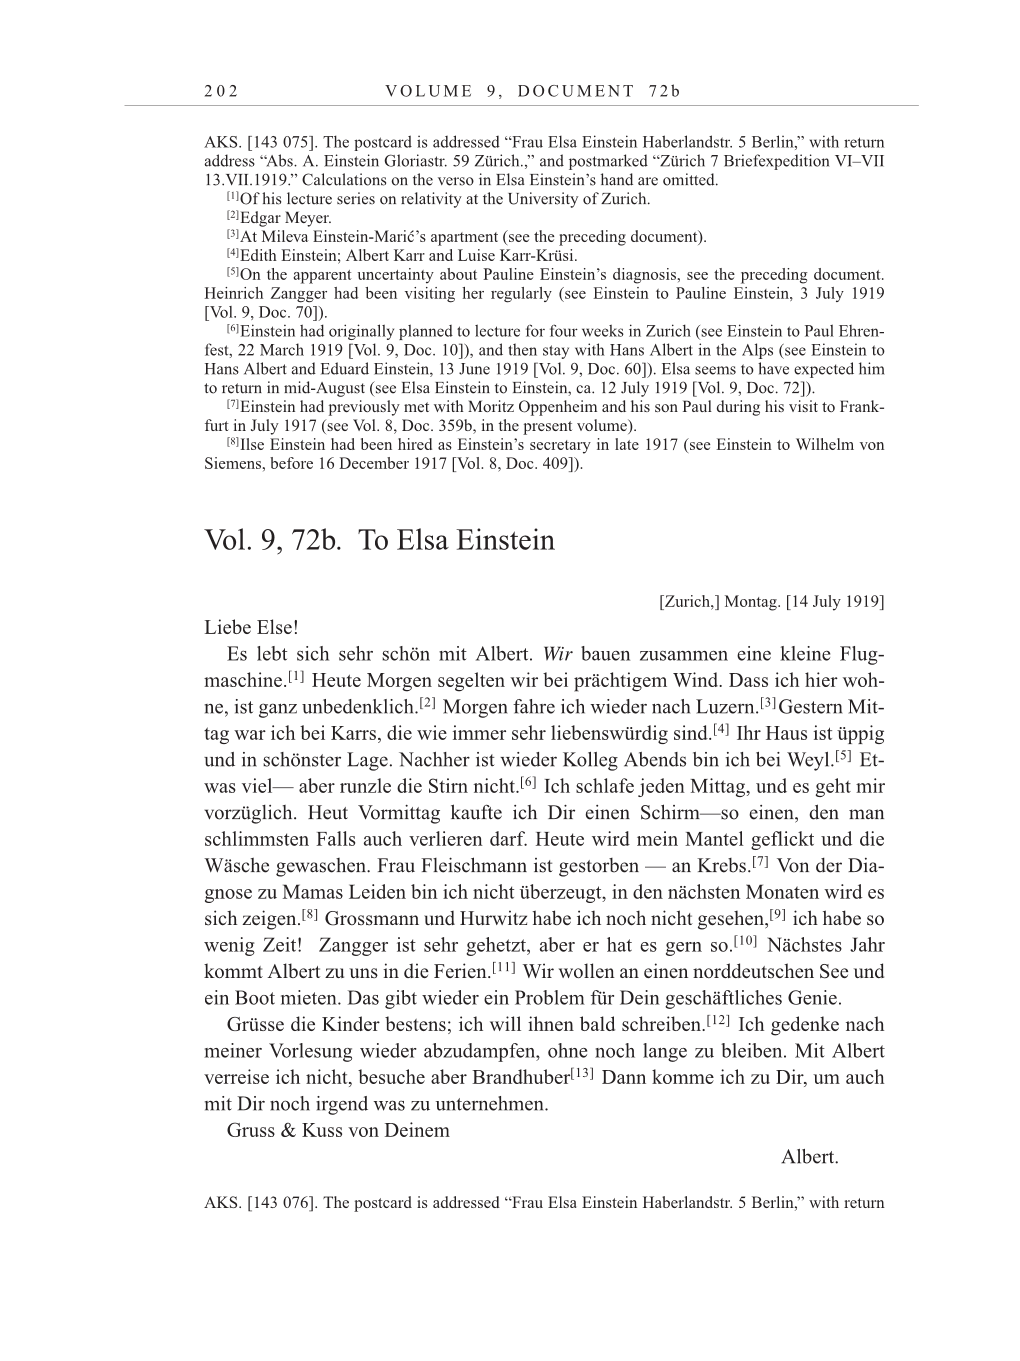 Volume 10: The Berlin Years: Correspondence May-December 1920 / Supplementary Correspondence 1909-1920 page 202